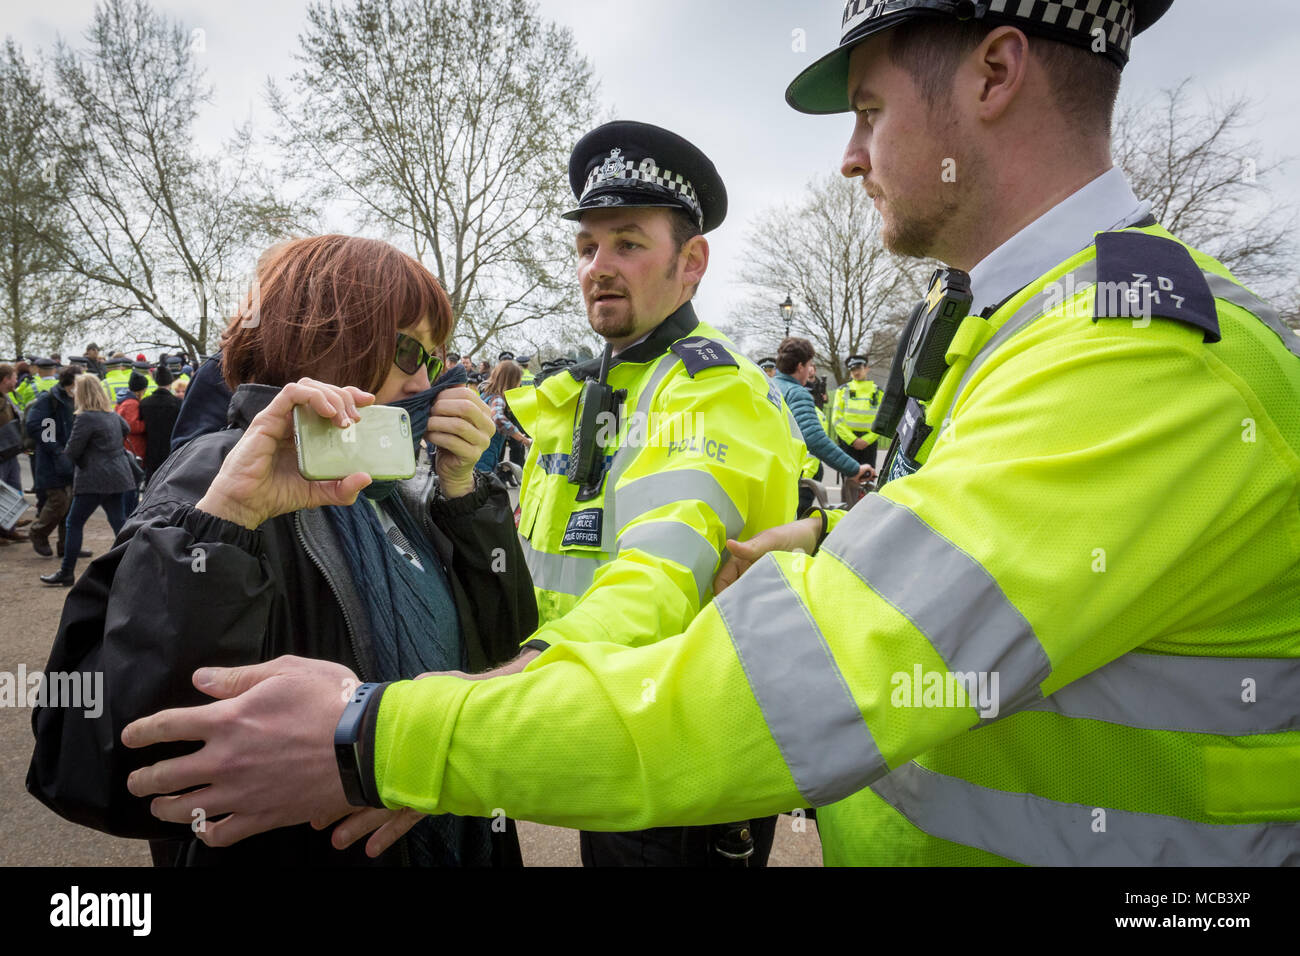 London, UK. 15th April, 2018. Confrontations between nationalist members and opposing anti-fascist activists (pictured) in Hyde Park as members of the right-wing Generation Identity movement wait to hear a speech by a representative from the German women’s 120dB movement. Credit: Guy Corbishley/Alamy Live News Stock Photo